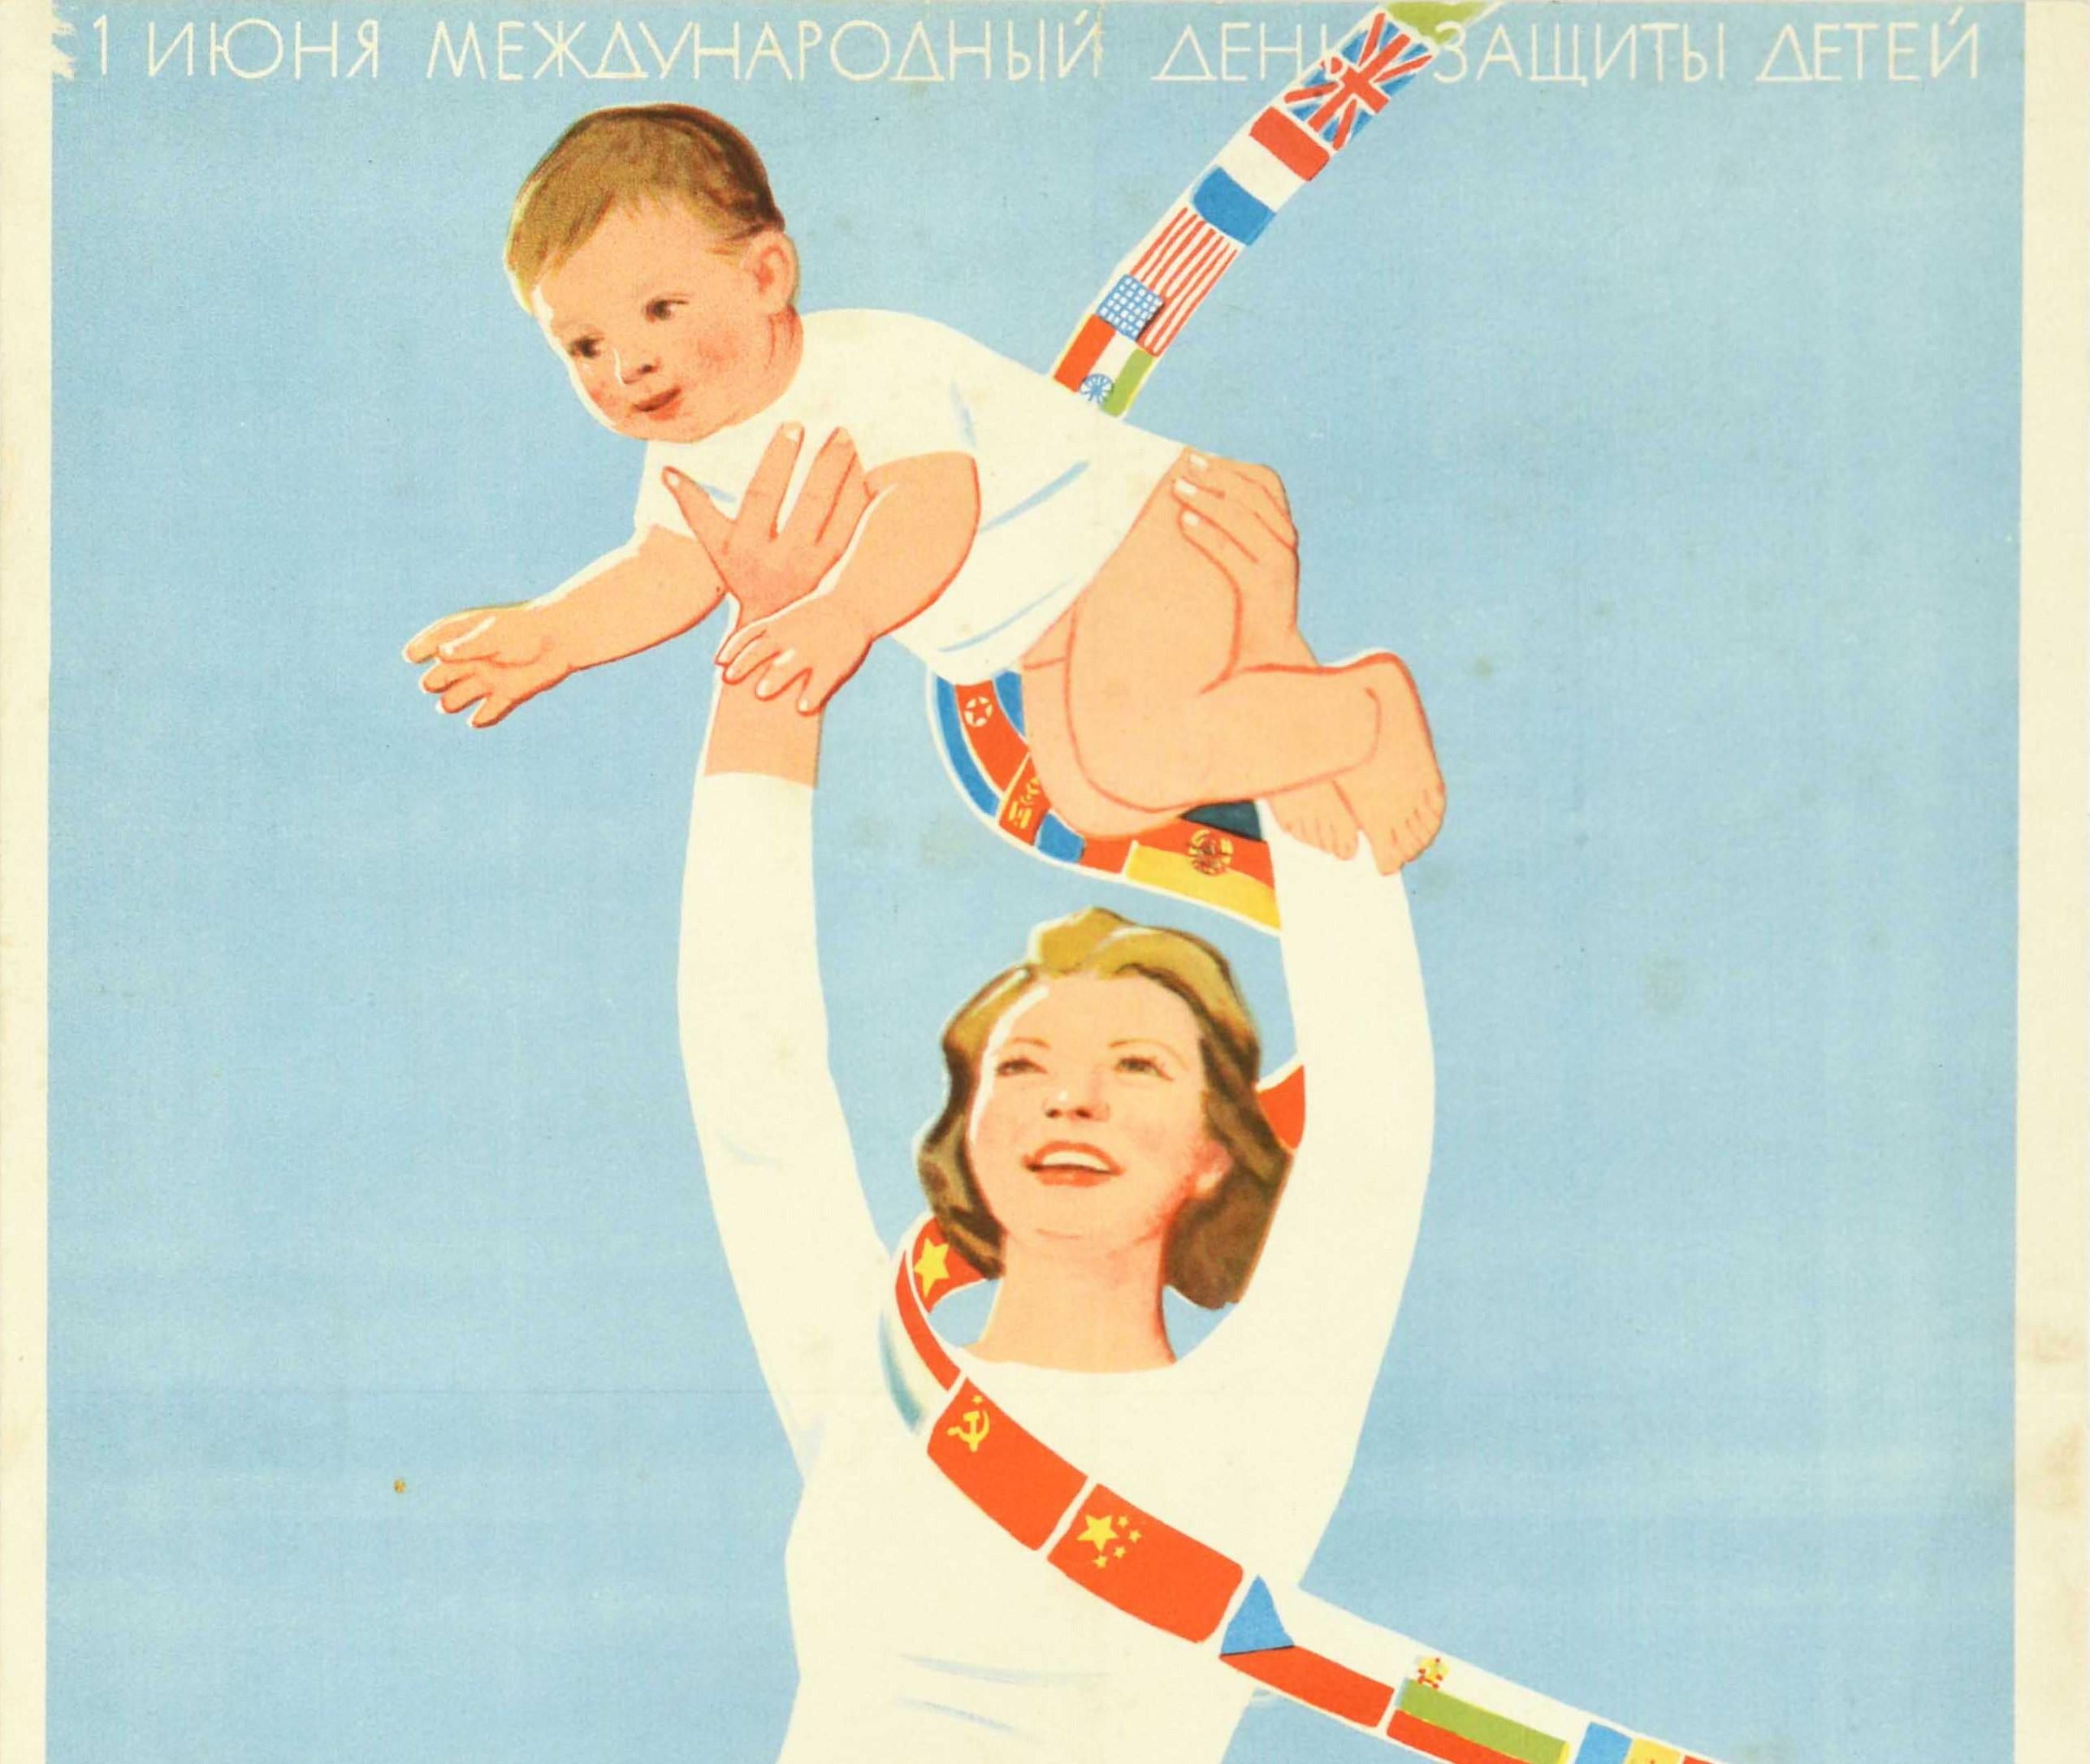 Original Vintage Poster International Children's Day For Life For Happiness USSR - Print by Belopolsky